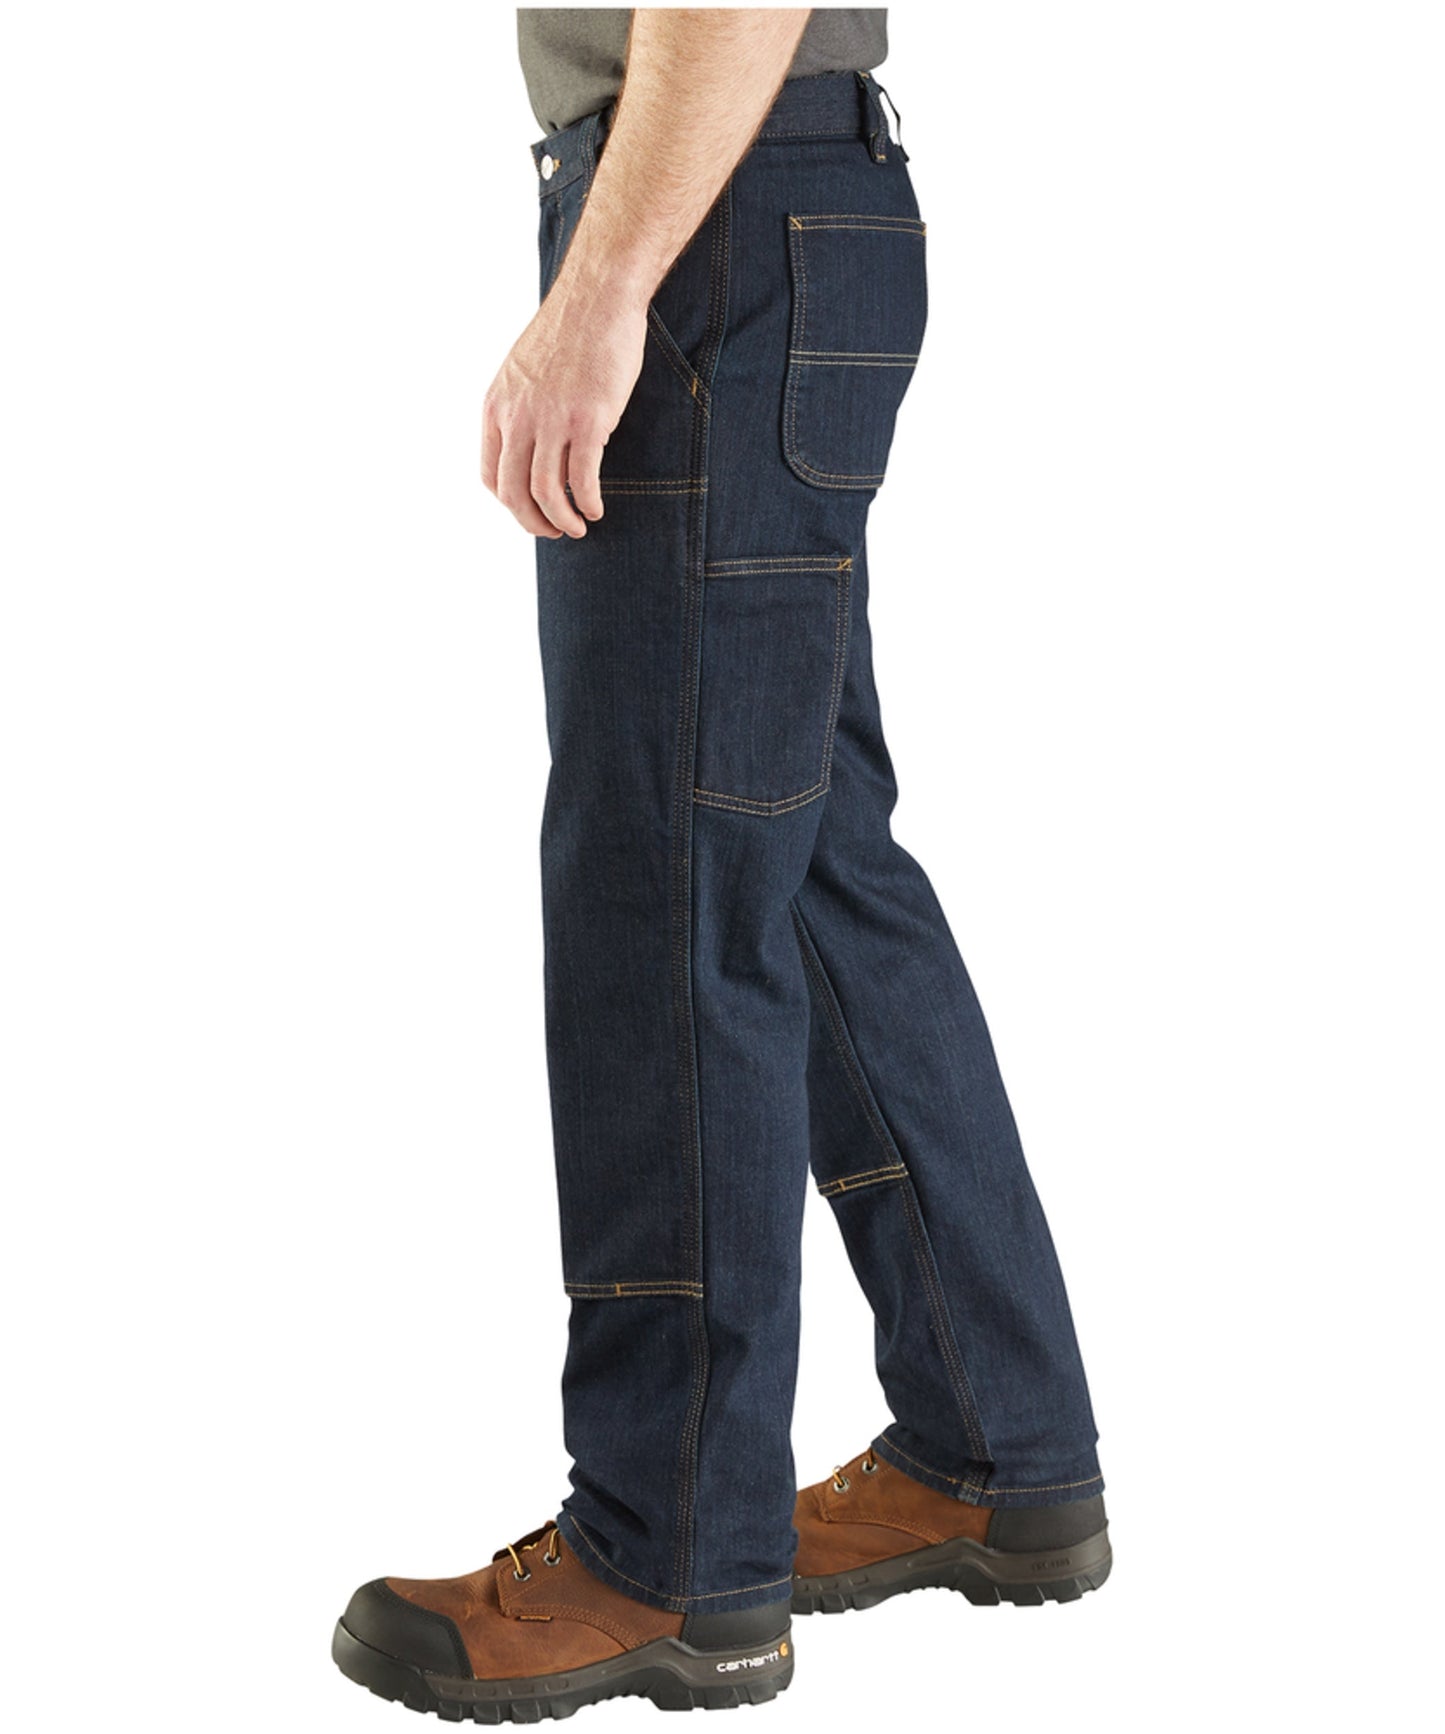 Carhartt Men's Rugged Flex Double Front Relaxed Fit Utility Work Jeans